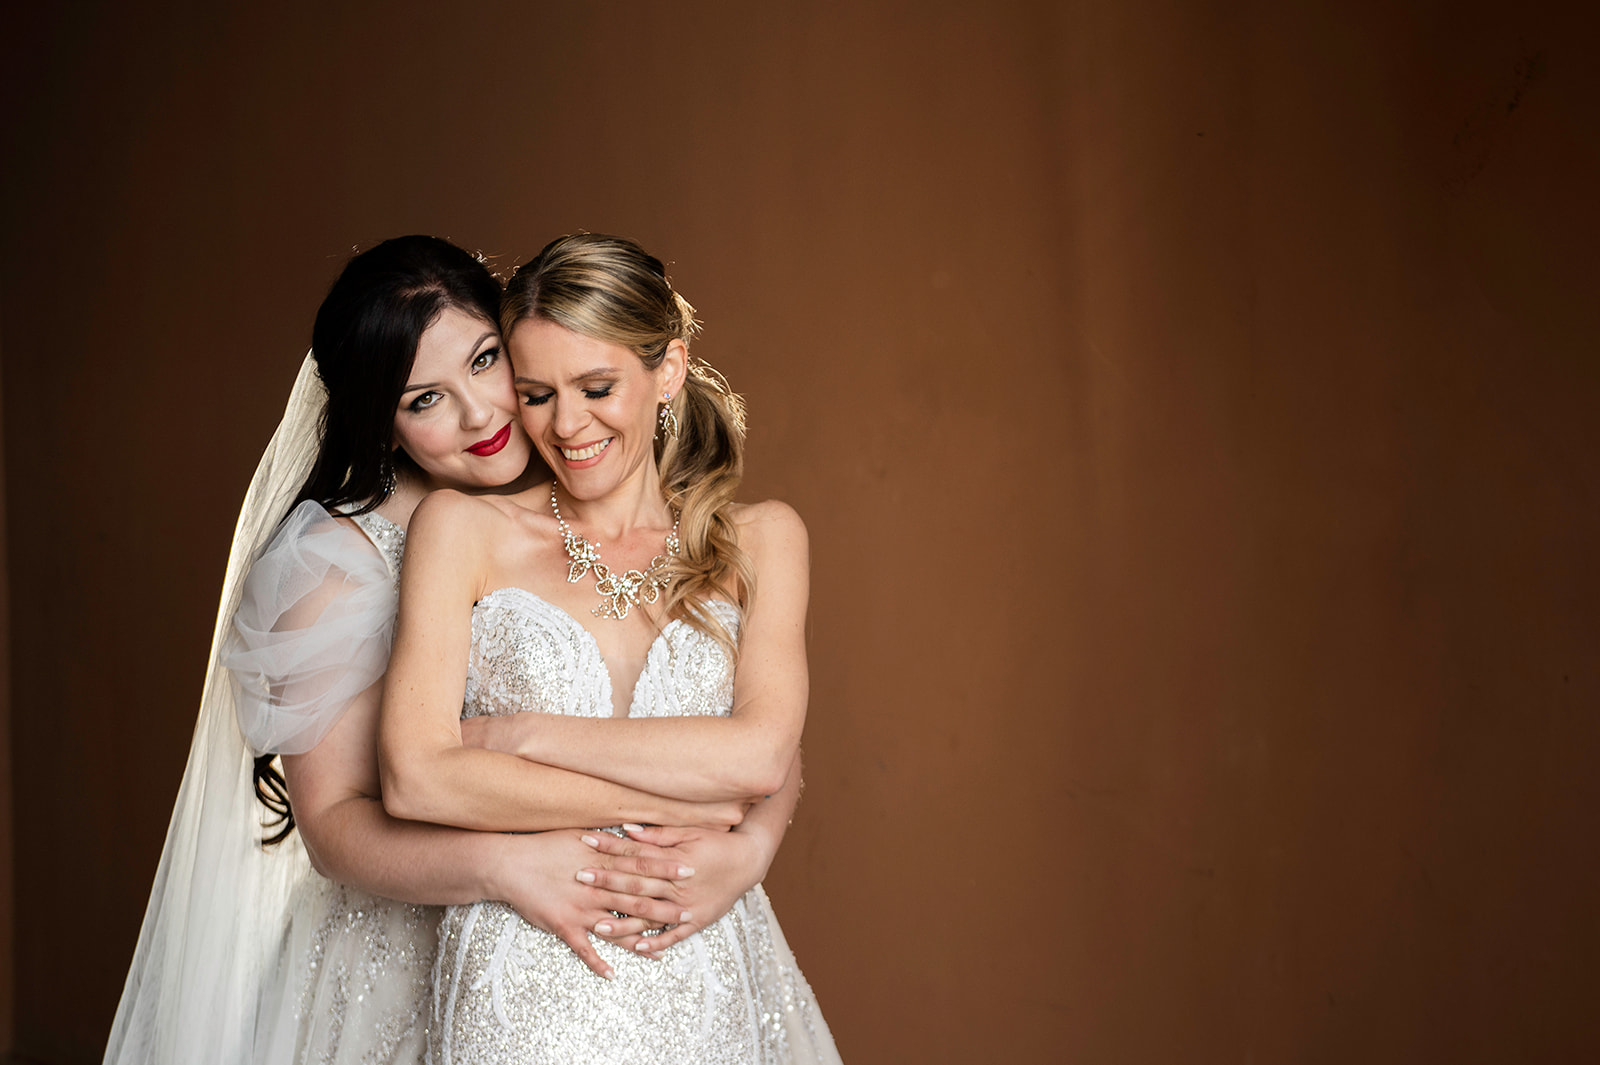 Two brides embracing in color photo in Las Vegas